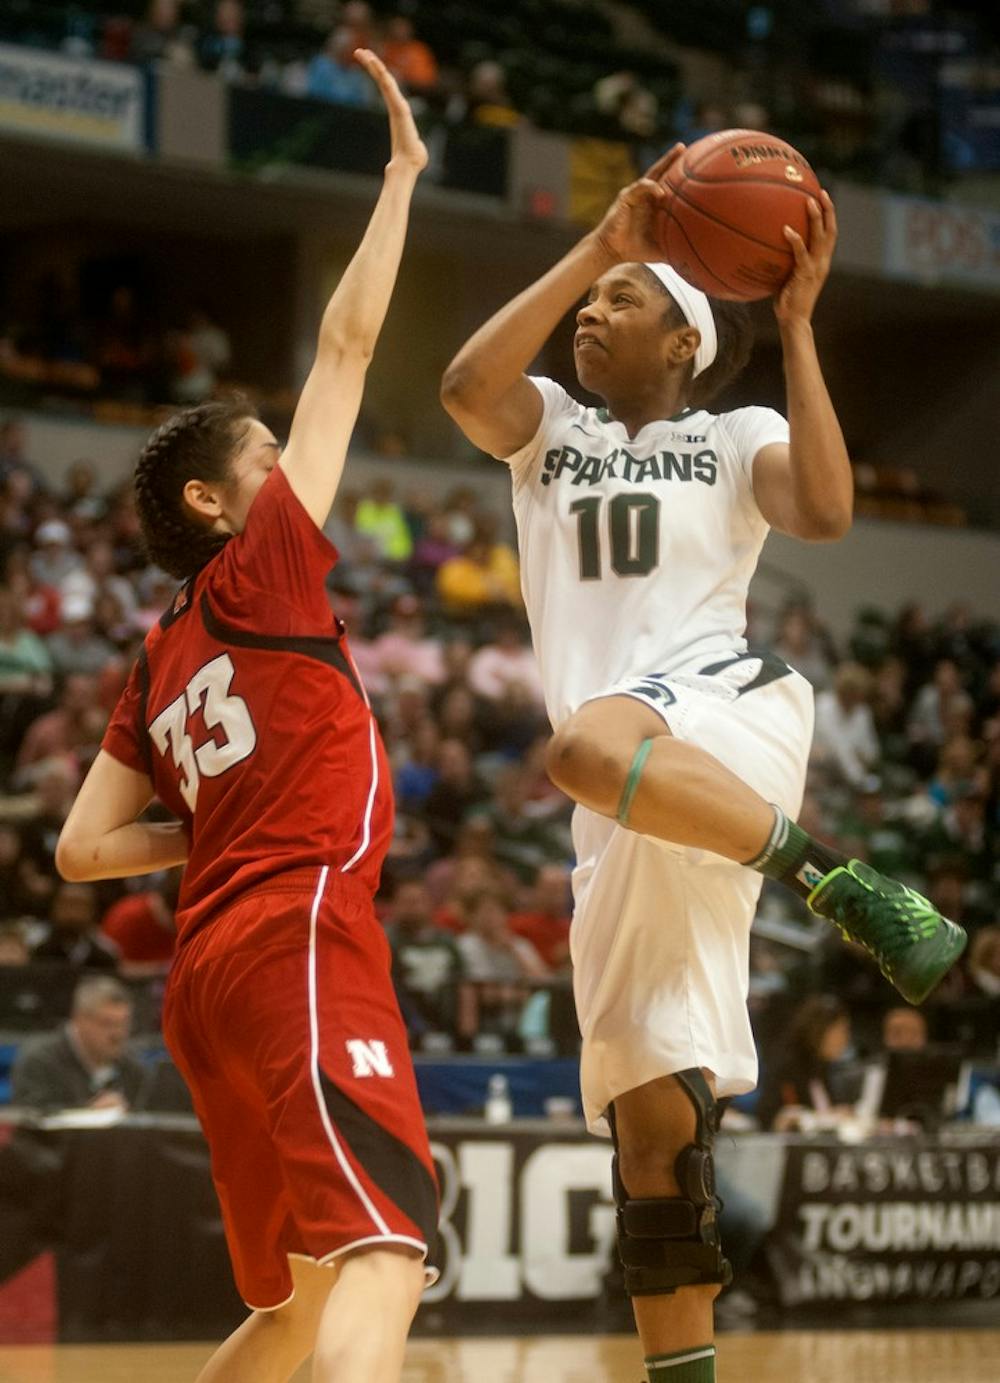 <p>Redshirt freshman guard Branndais Agee shoots the ball while Nebraska guard Rachel Theriot guards on March 8, 2014, at Bankers Life Fieldhouse in Indianapolis during the semi-finals of the Big Ten Tournament. The Cornhuskers defeated the Spartans, 86-58. Betsy Agosta/The State News</p>